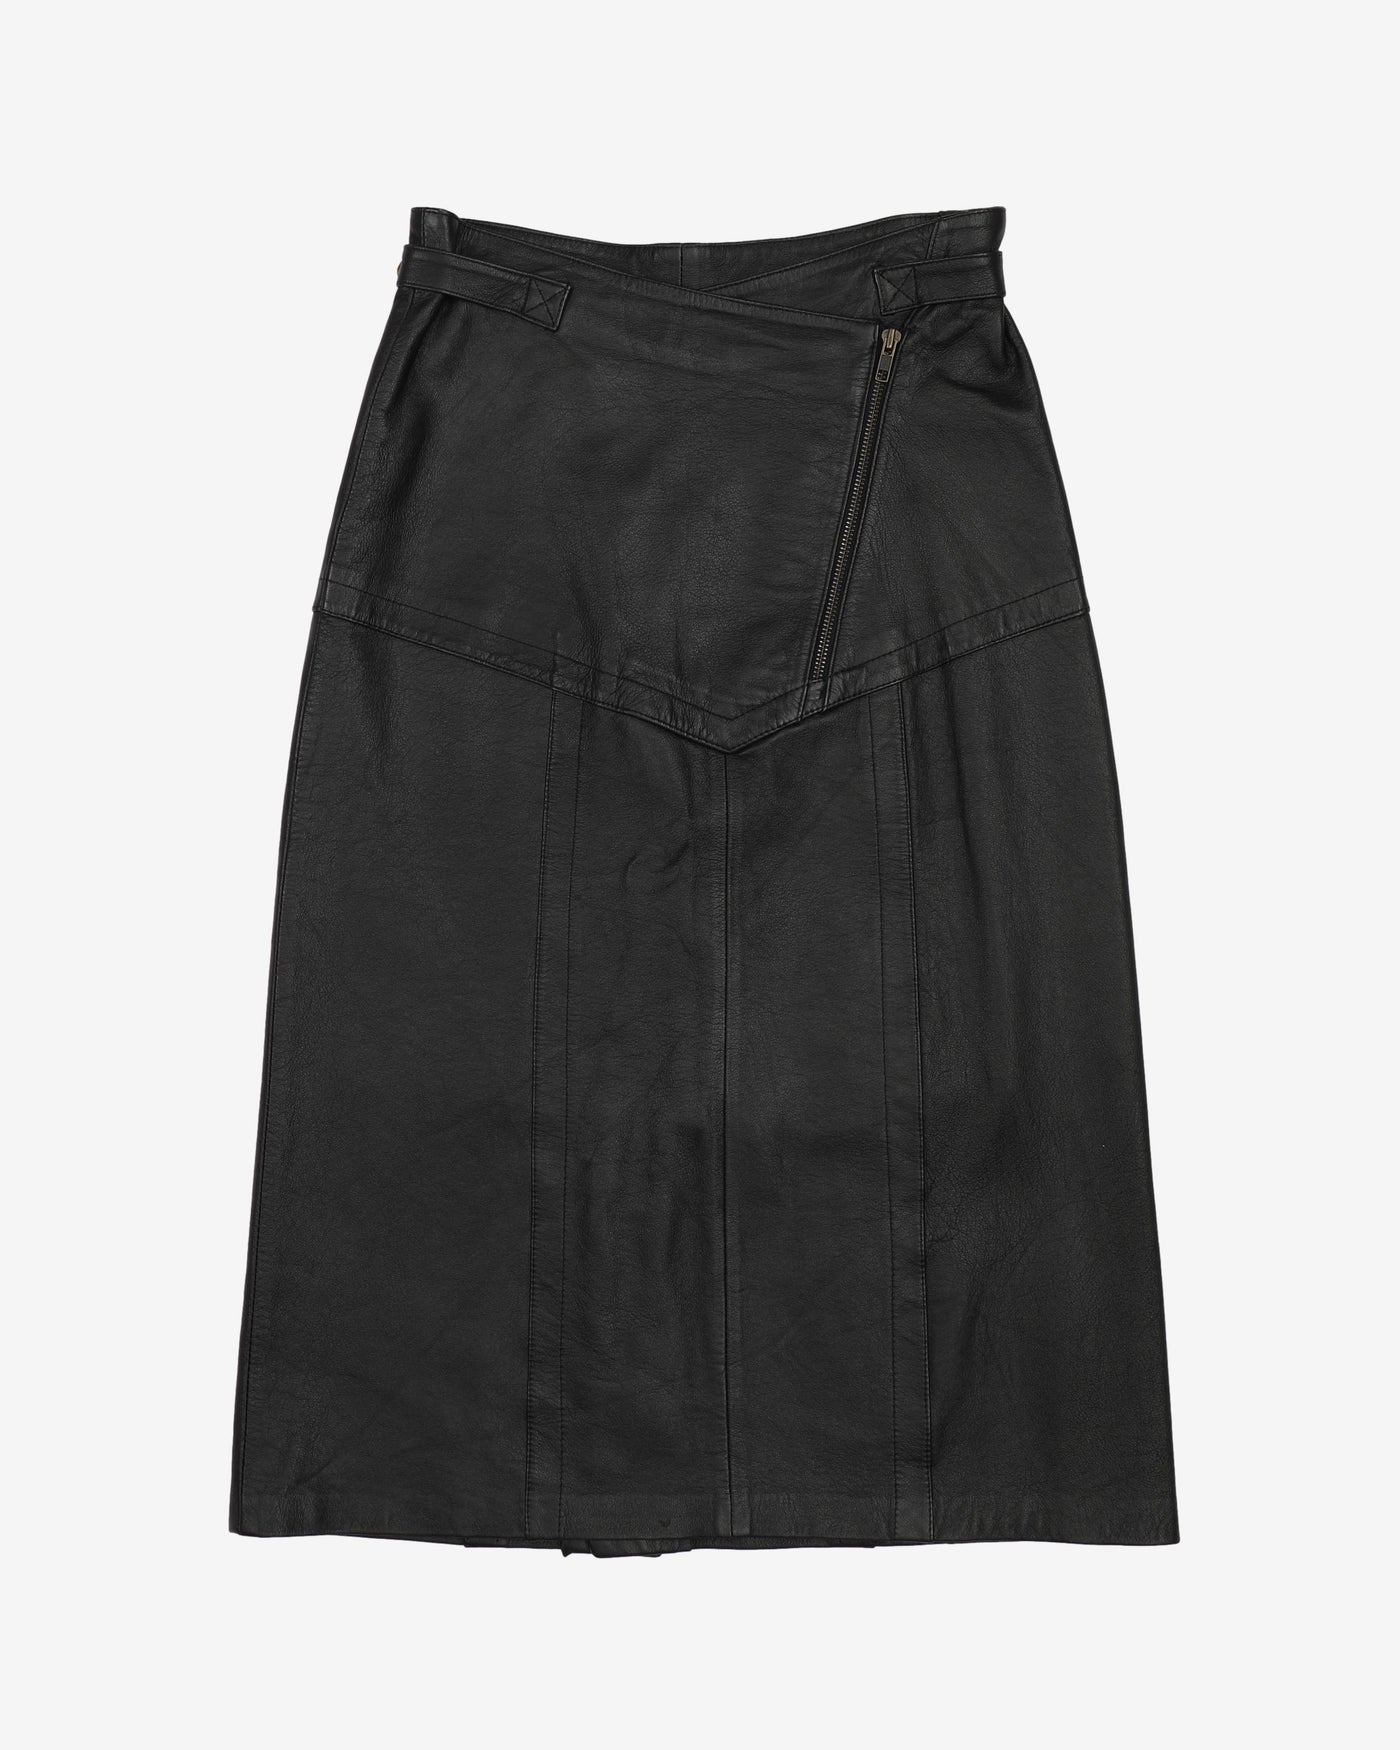 Black Leather With Zip Detail Skirt - S